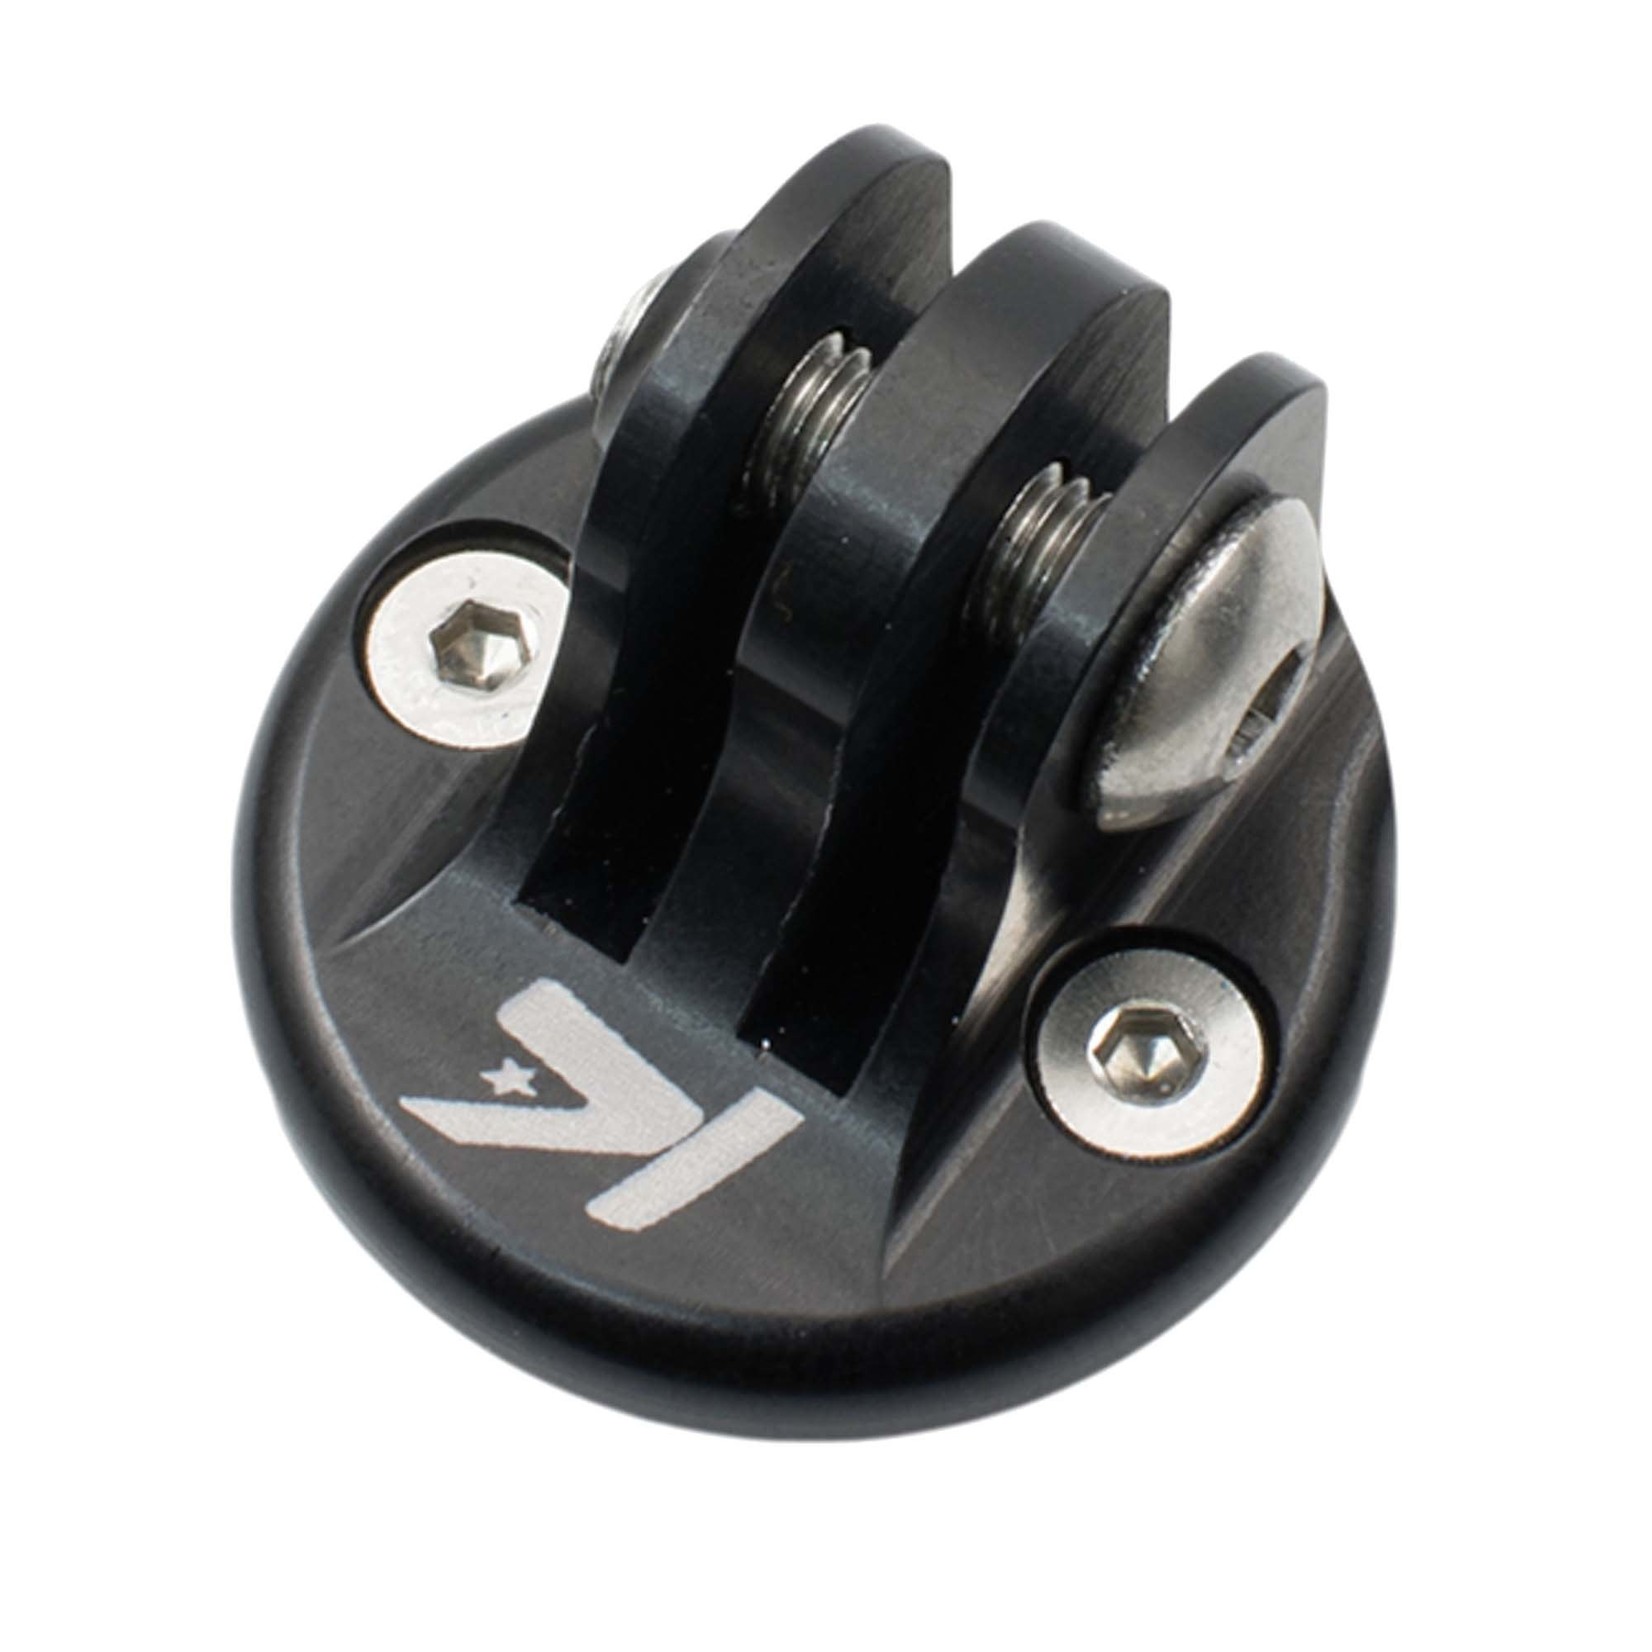 SCOTT BICYCLES SYNCROS, Adapter for iC Front Comp. Mount, Black